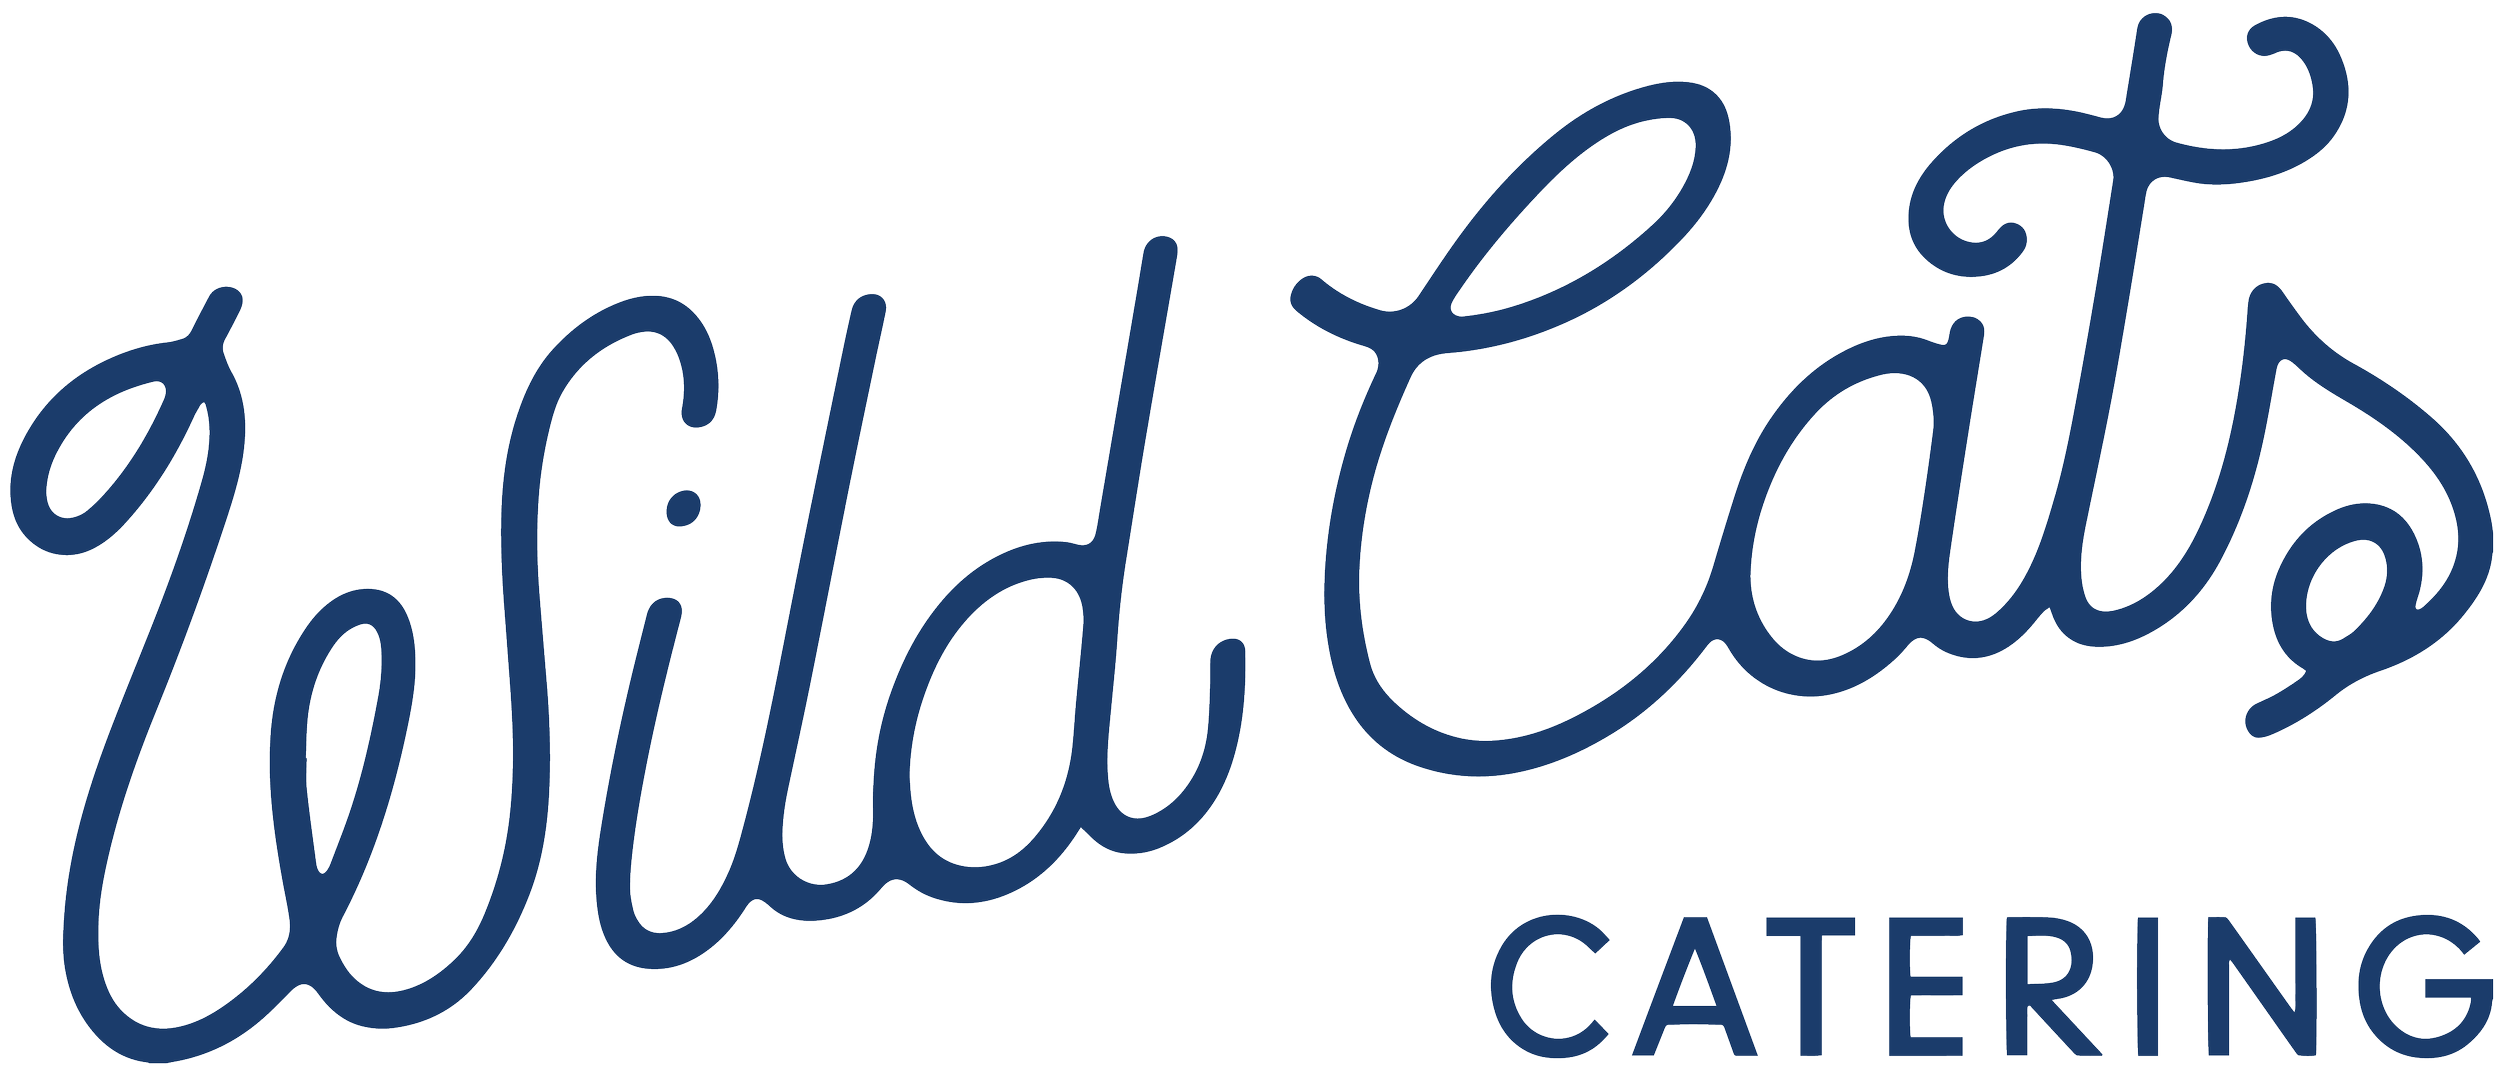 Wild Cats Catering